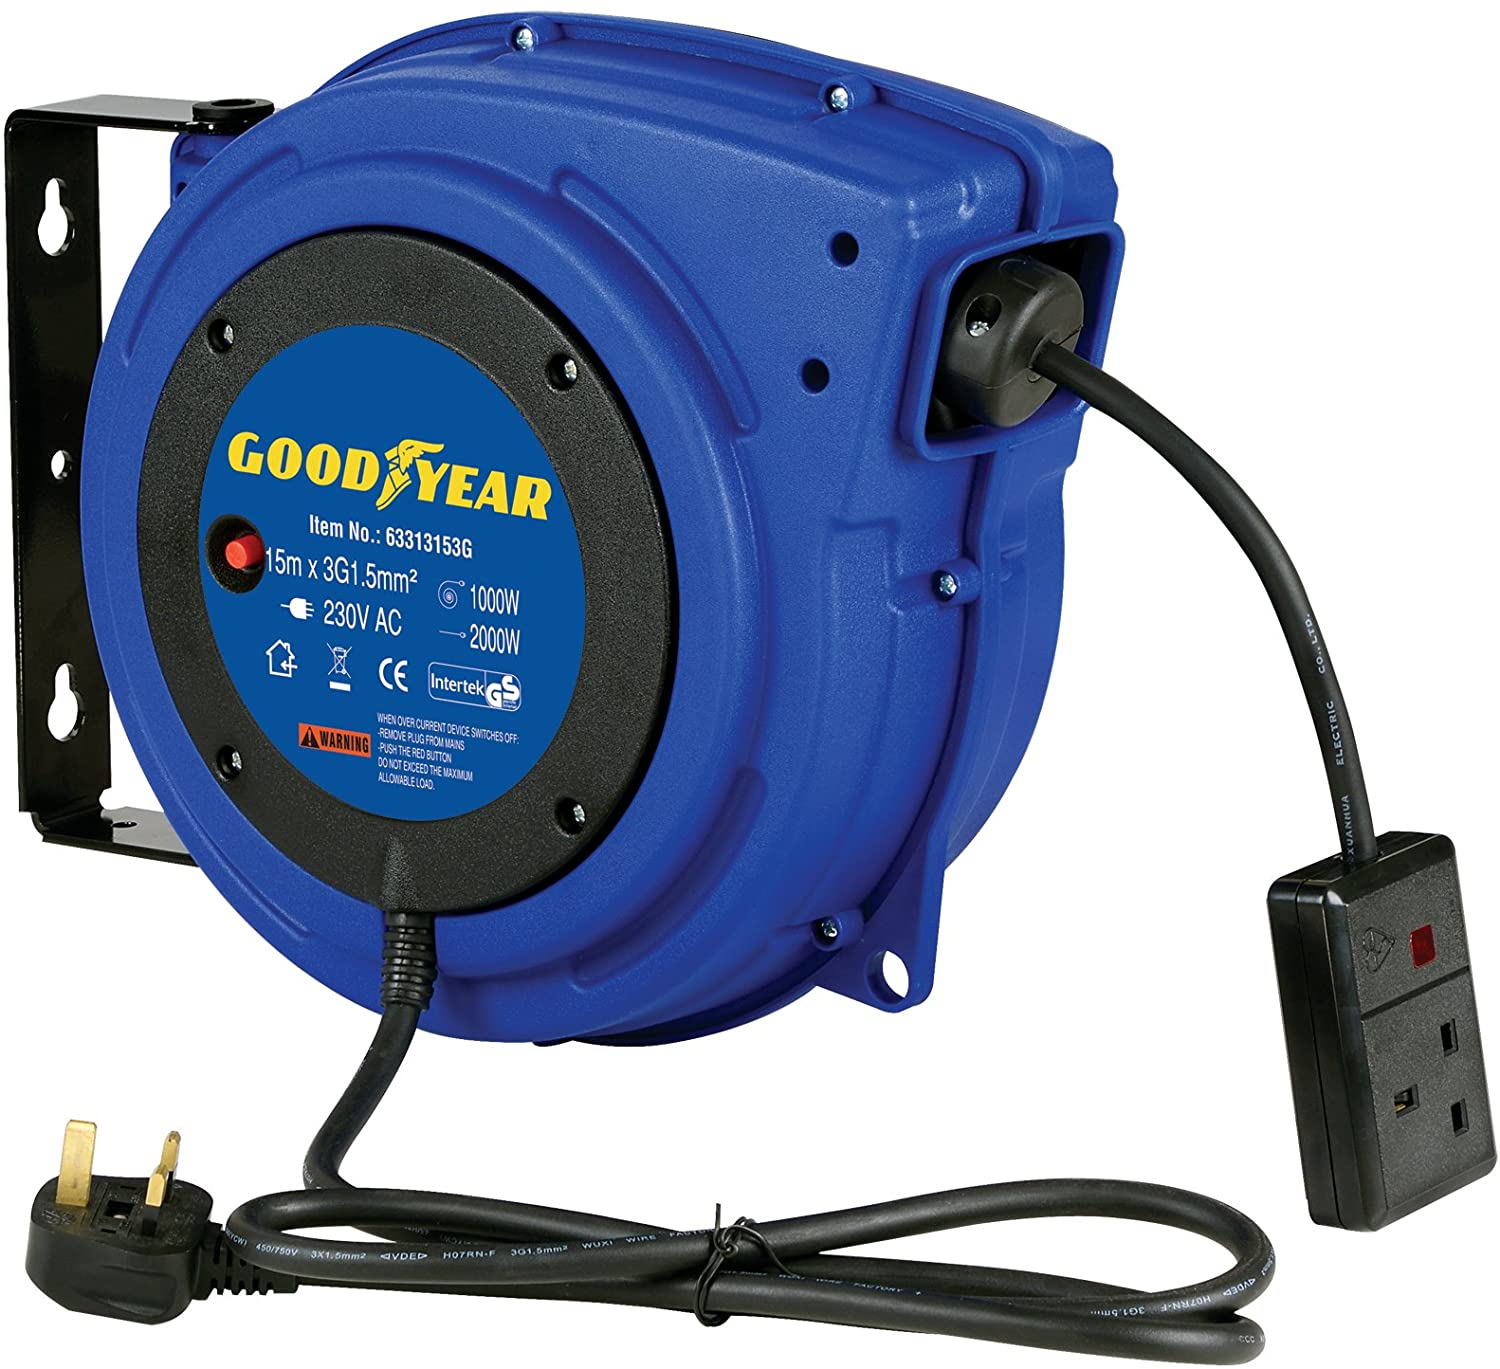 Goodyear Extension Cable Reel Heavy Duty Retractable 15m x 3G1.5mm2 H07RN-F UK Plug Type 230V AC 8.6A 1000W Wound 2000W Unwound Indoor Professional DIY Usable CE & Intertek GS Listed